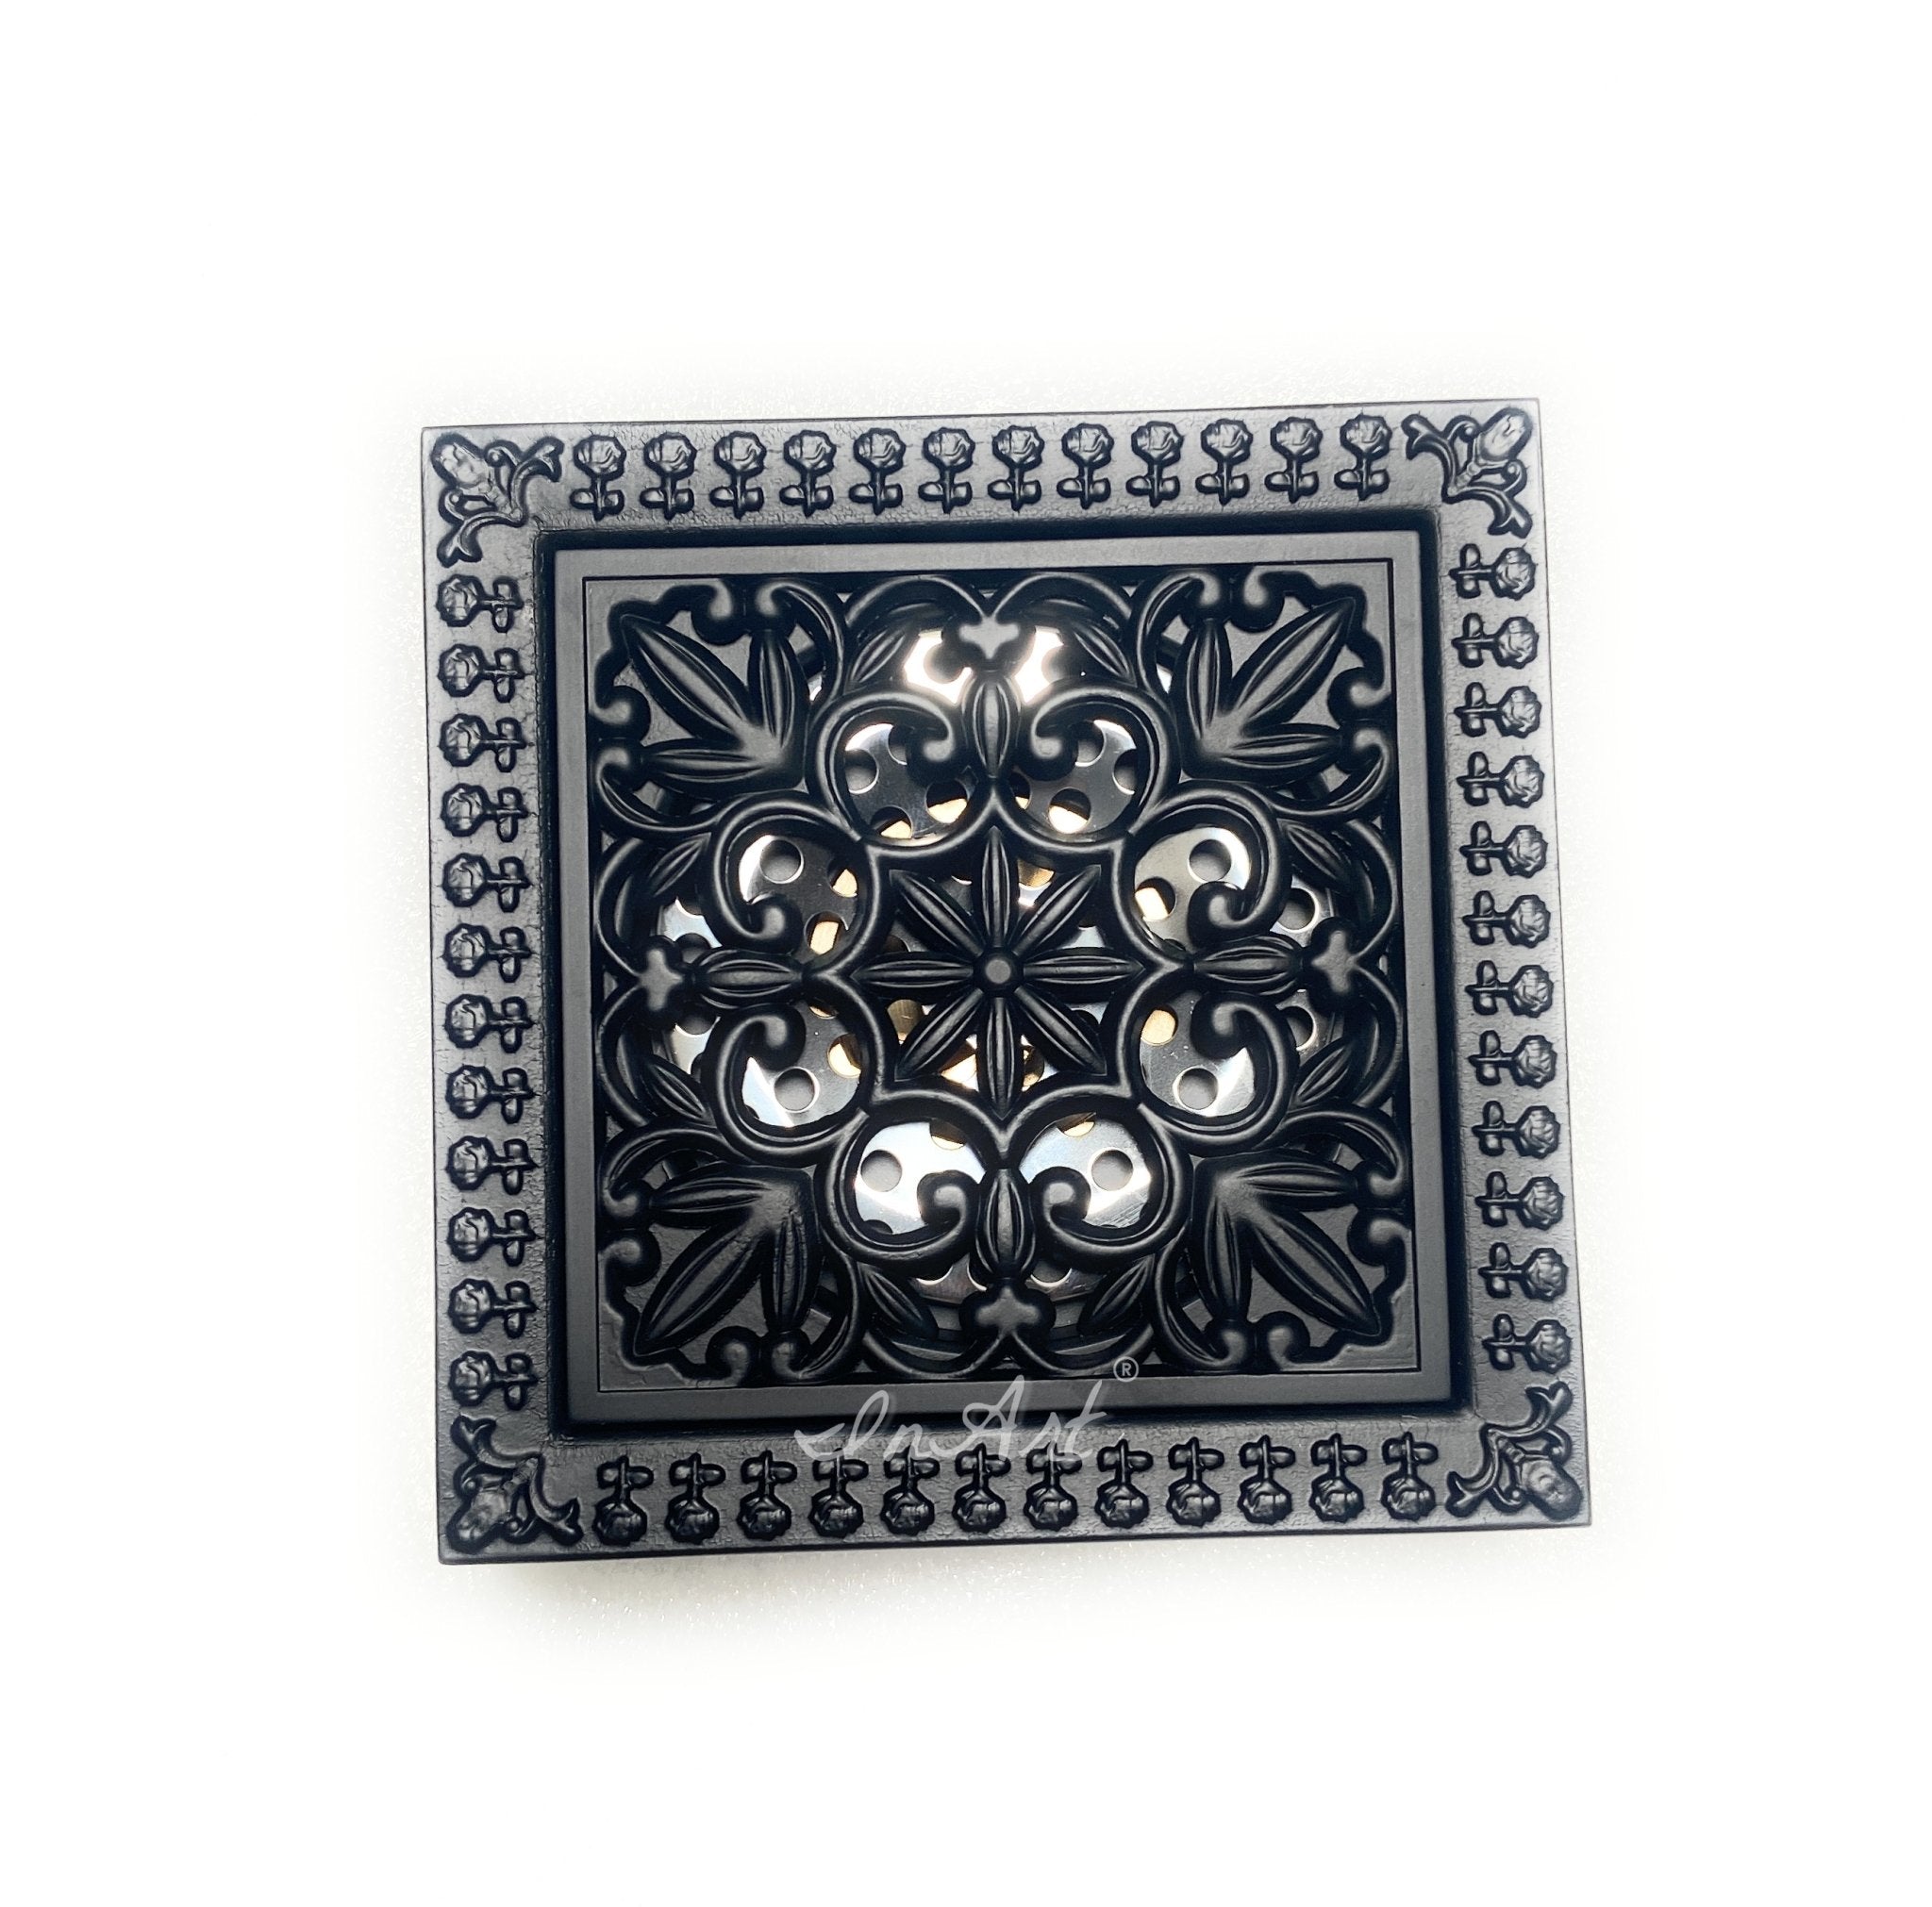 https://inart-in.com/cdn/shop/products/inart-brass-square-shower-floor-drain-with-removable-cover-grid-grate-5-inch-long-black-matt-color-floral-pattern-inart-studio-usa-479147_2048x.jpg?v=1663697017